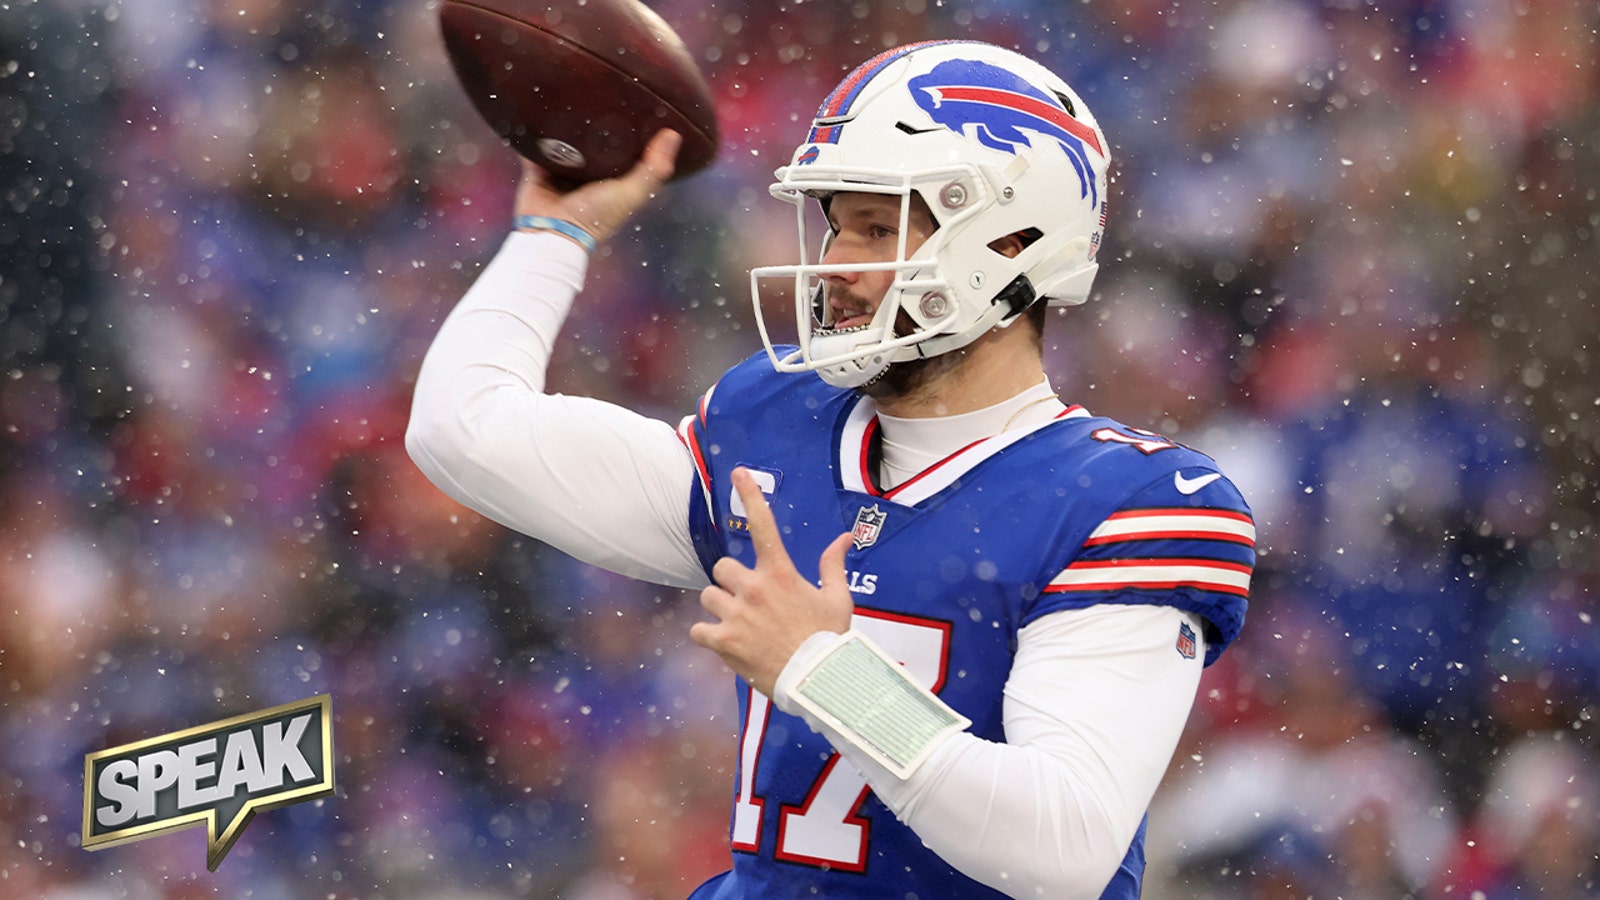 Does Josh Allen get a pass for his play vs. Bengals?